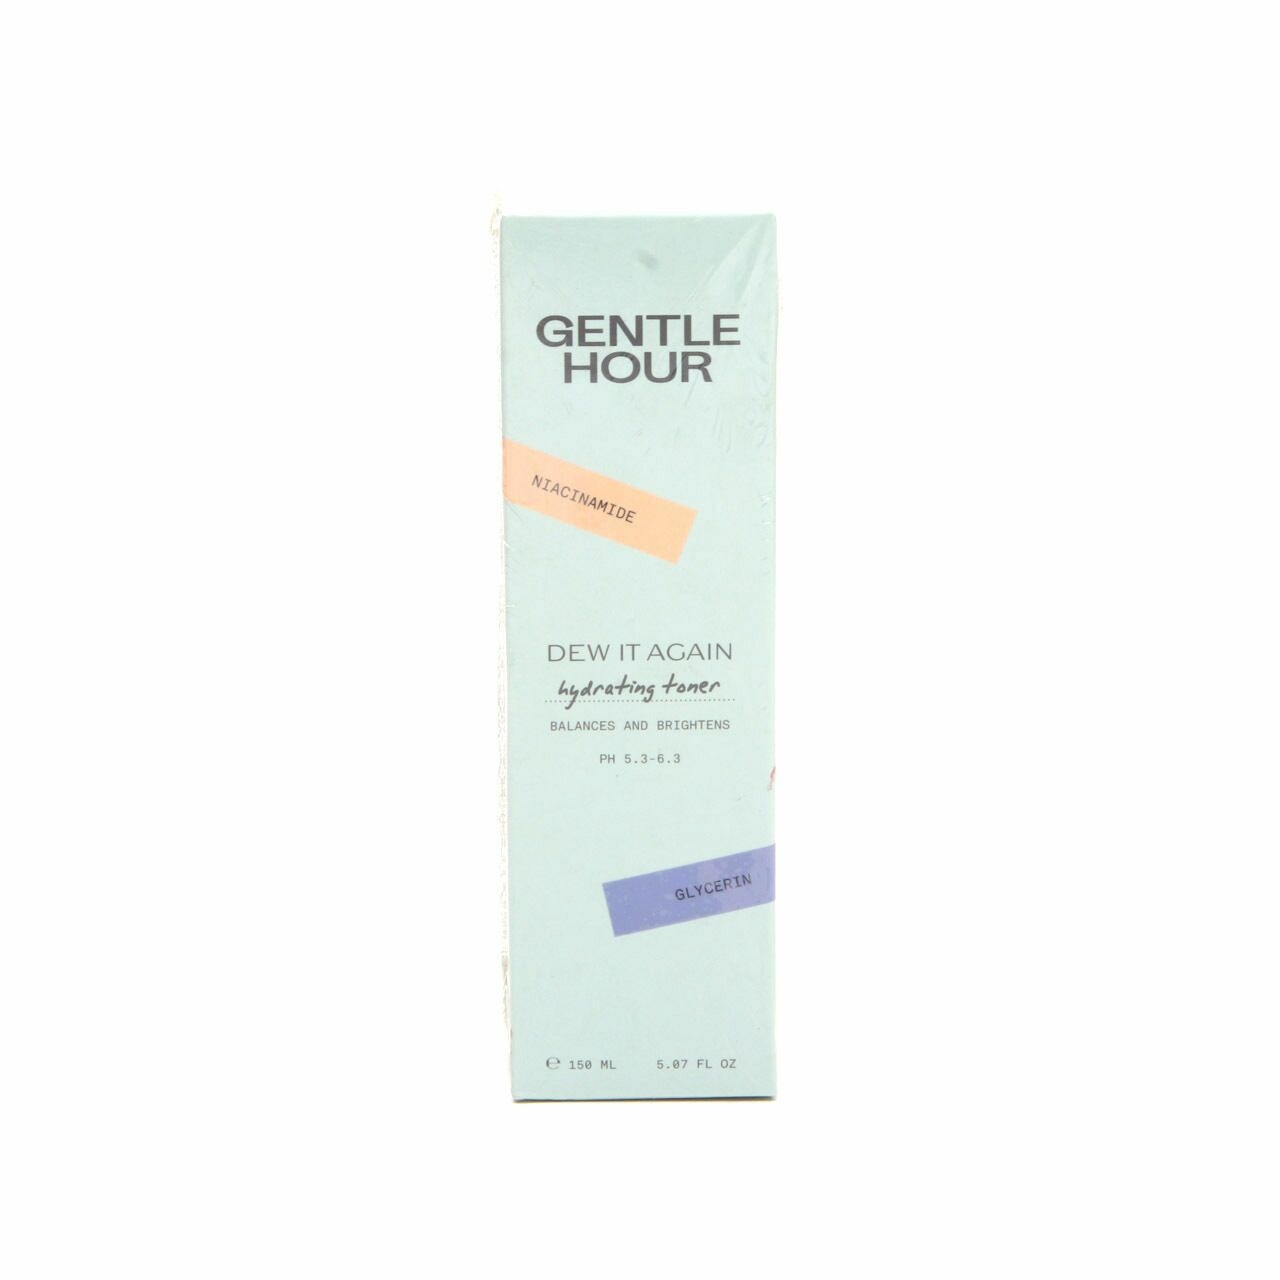 Gentle Hour Dew It Again Hydrating Toner Niacinamide Balances and Brightens Skin Care